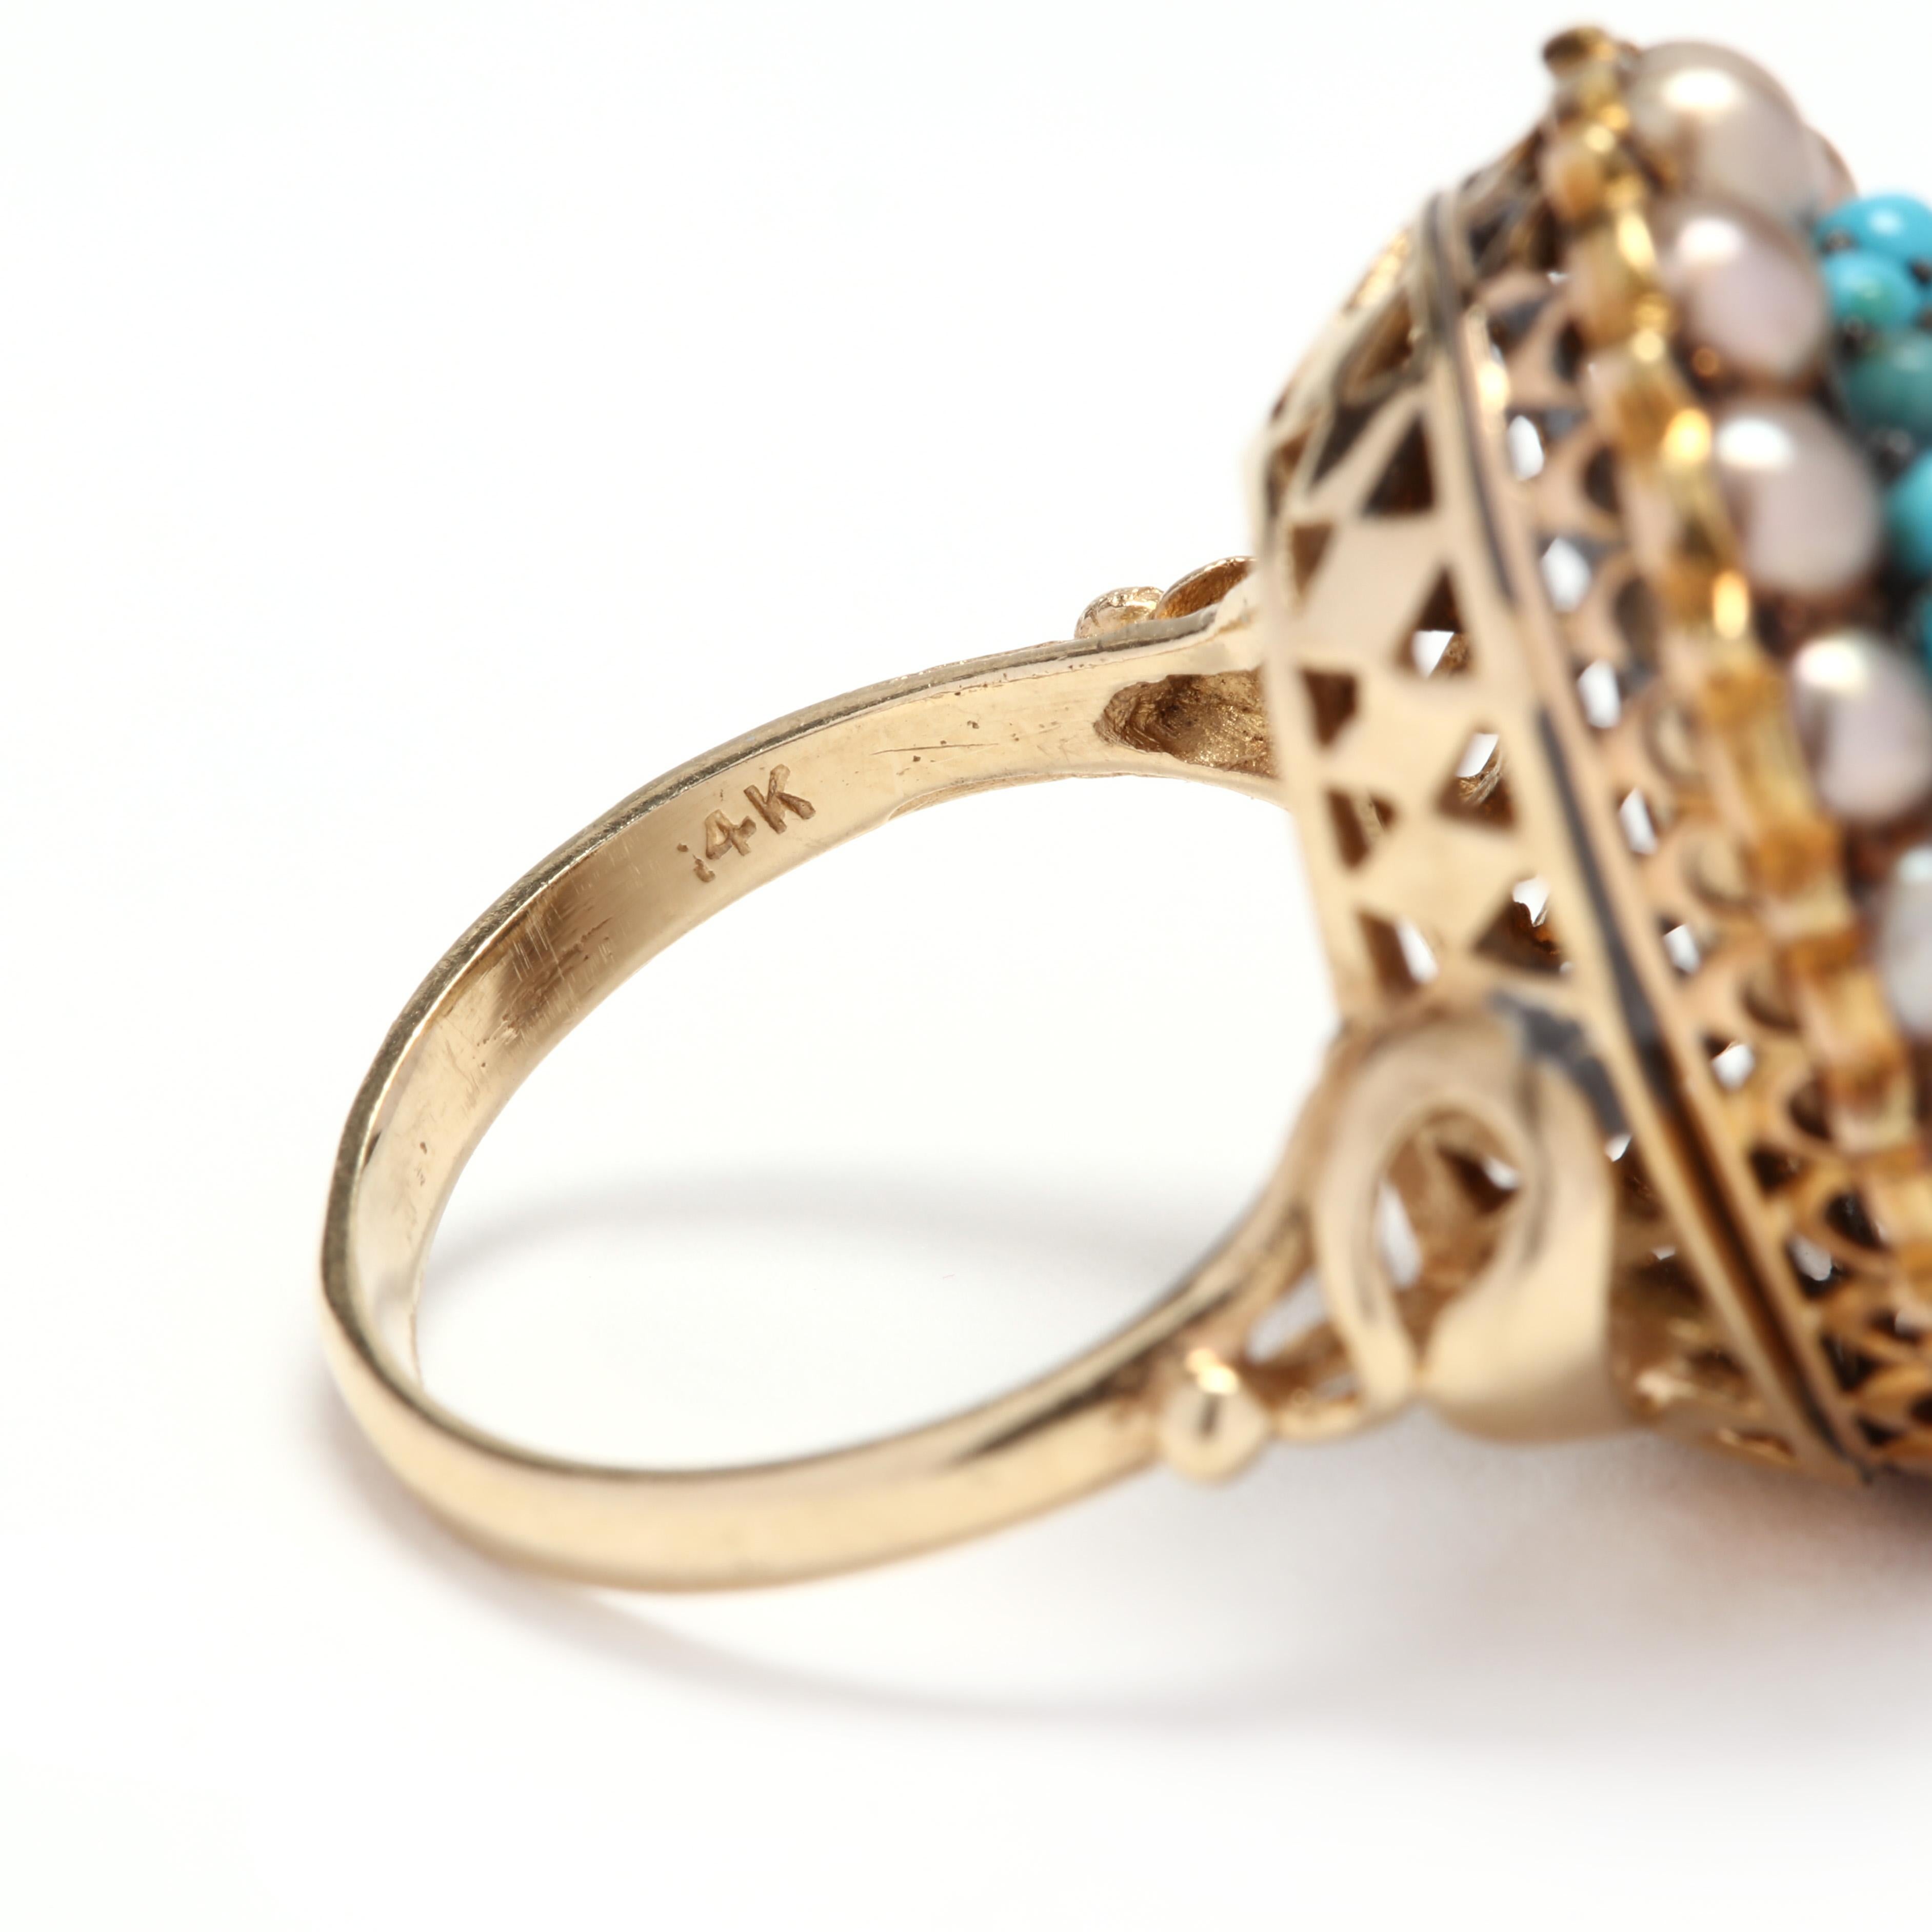 Women's or Men's Victorian 14 Karat Gold Diamond, Turquoise, and Pearl Bombe Ring